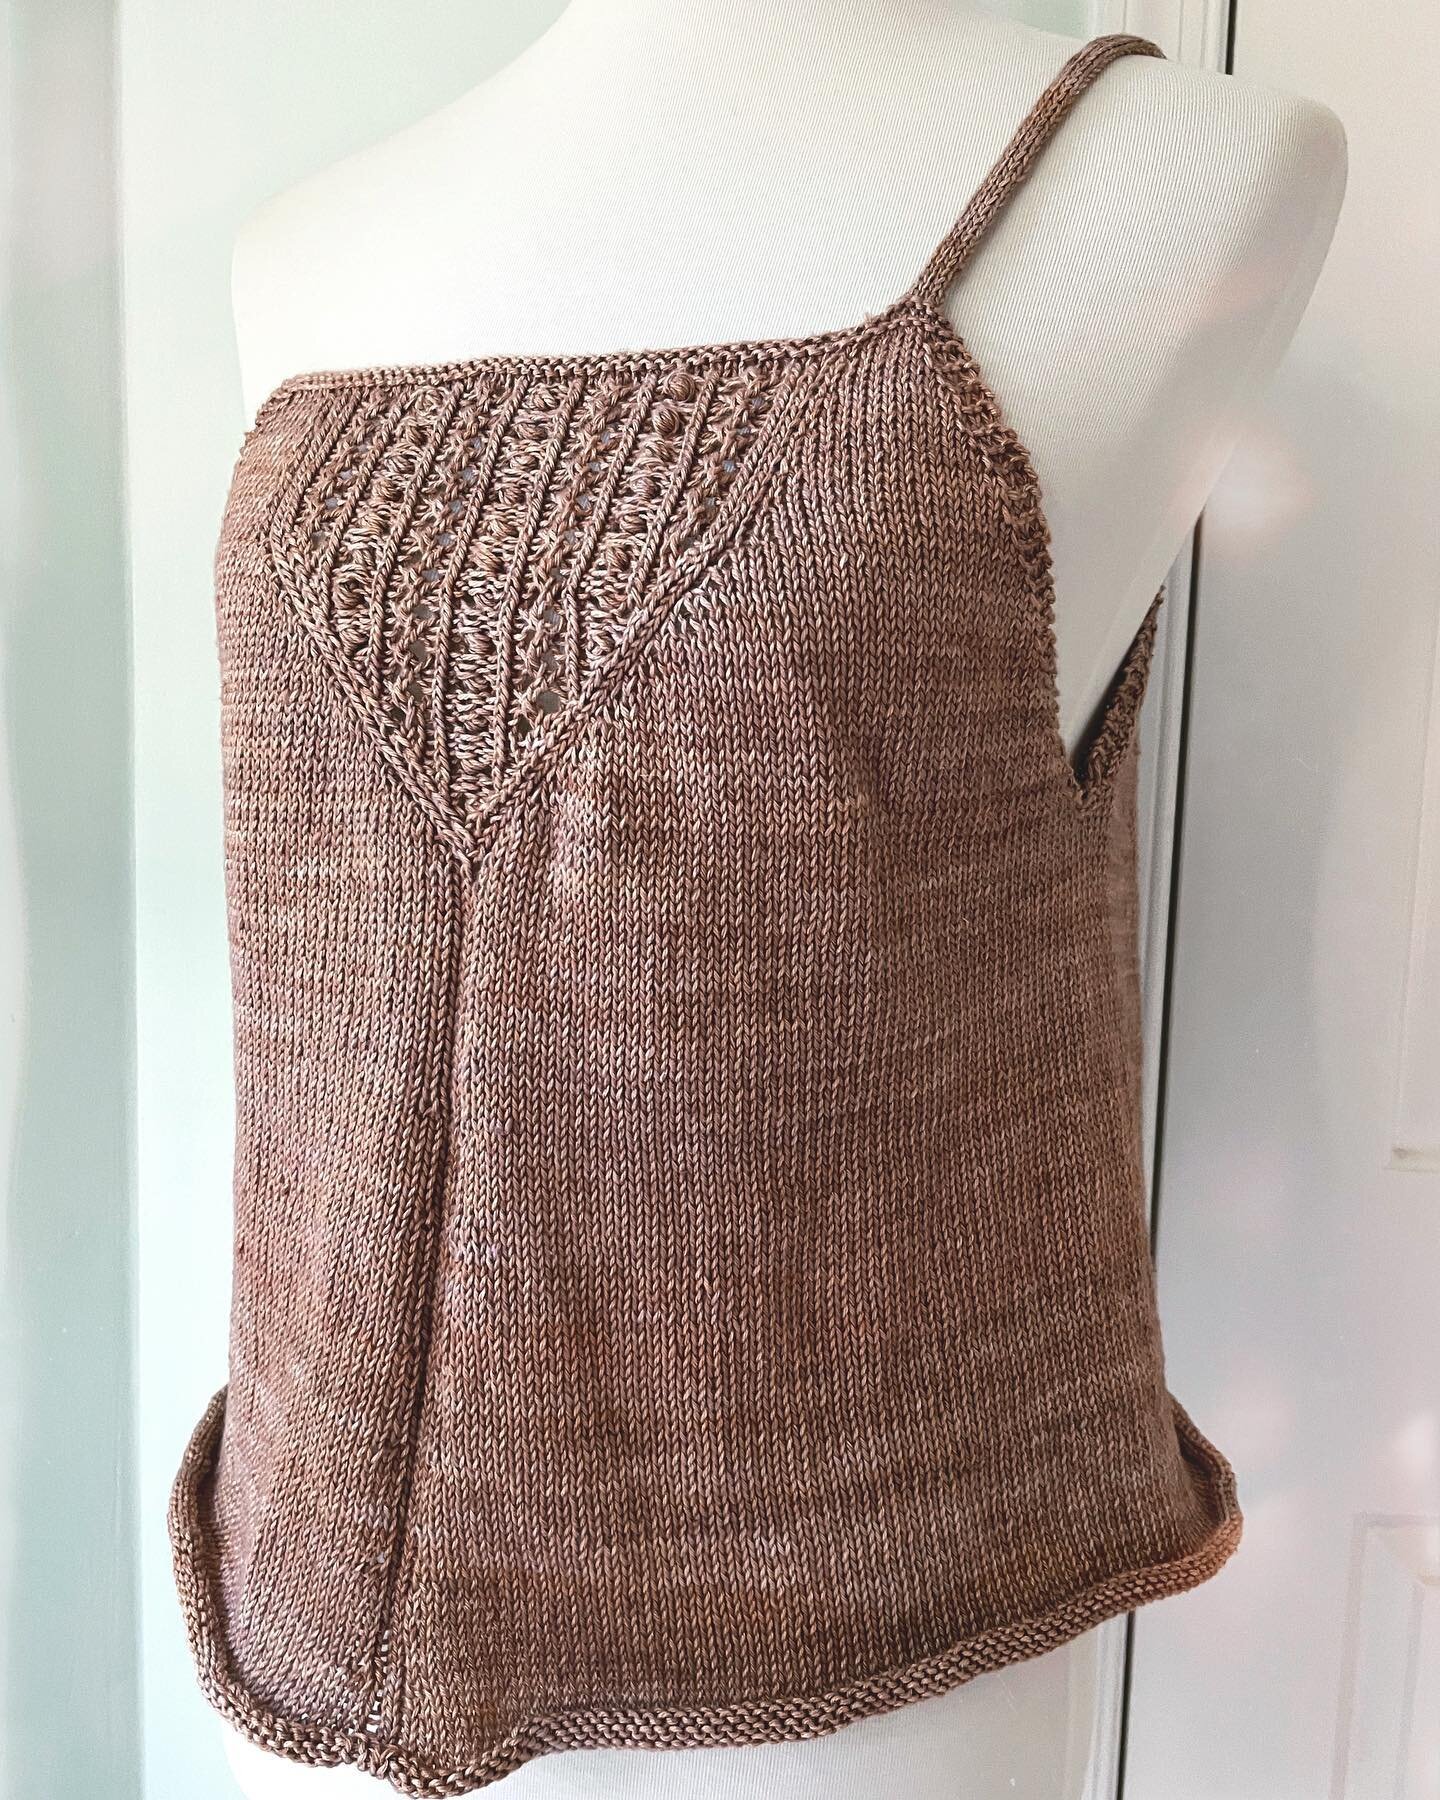 One strap away from an #fofriday here! 
So psyched to have my Gelato Tank Top done in time to wear before the weather cools down.
#makenine2022 #magpiefibers #gelatotanktop